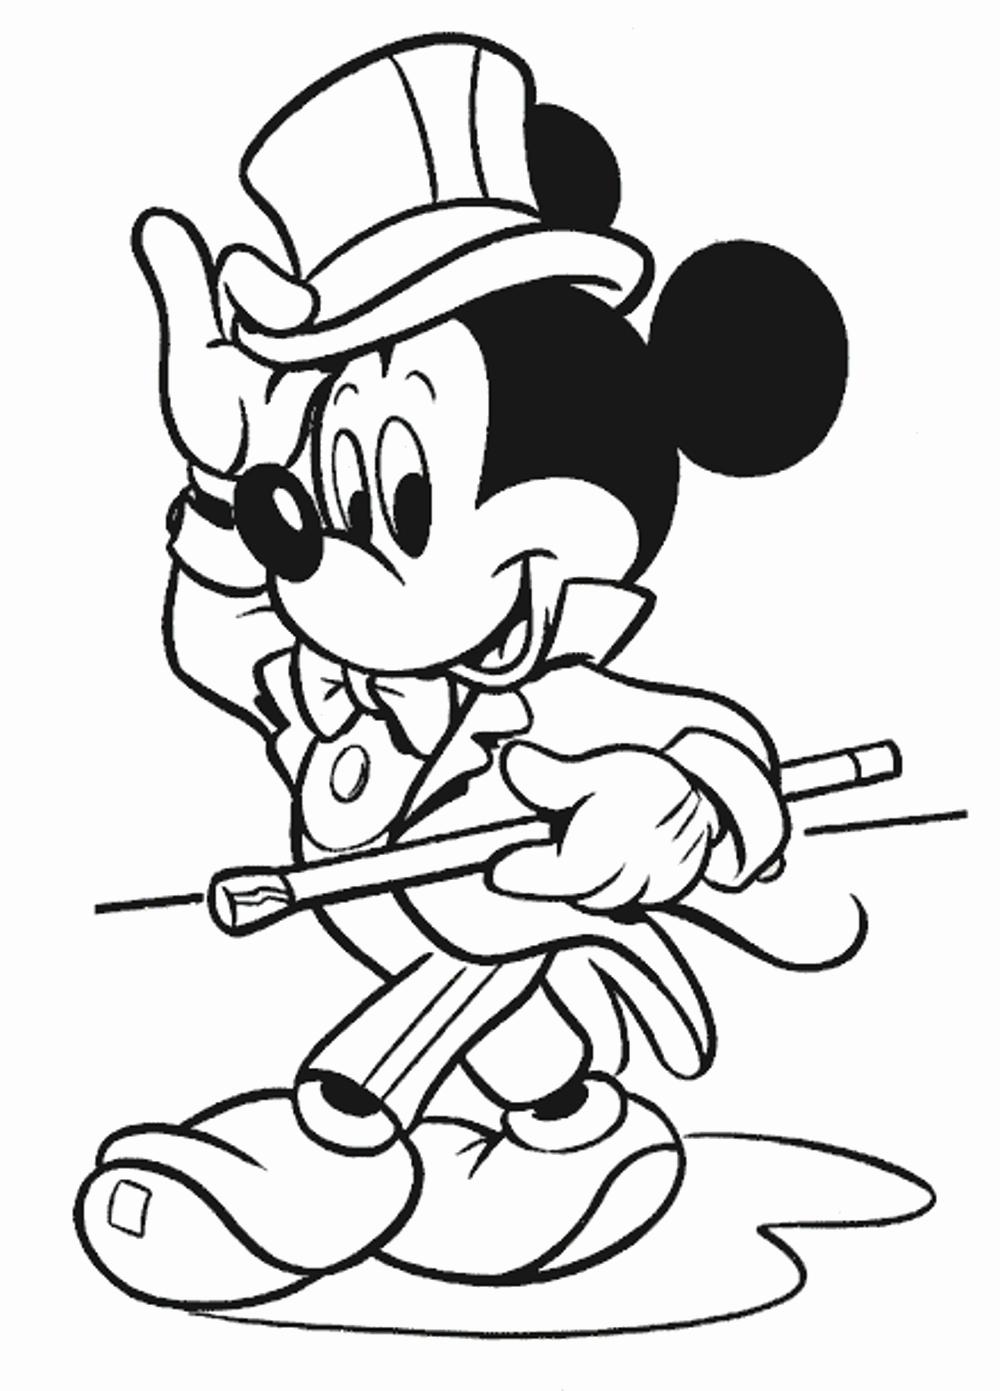 Mickey Mouse Colouring Sheets Best Of Learning Through Mickey Mouse Coloring Pages